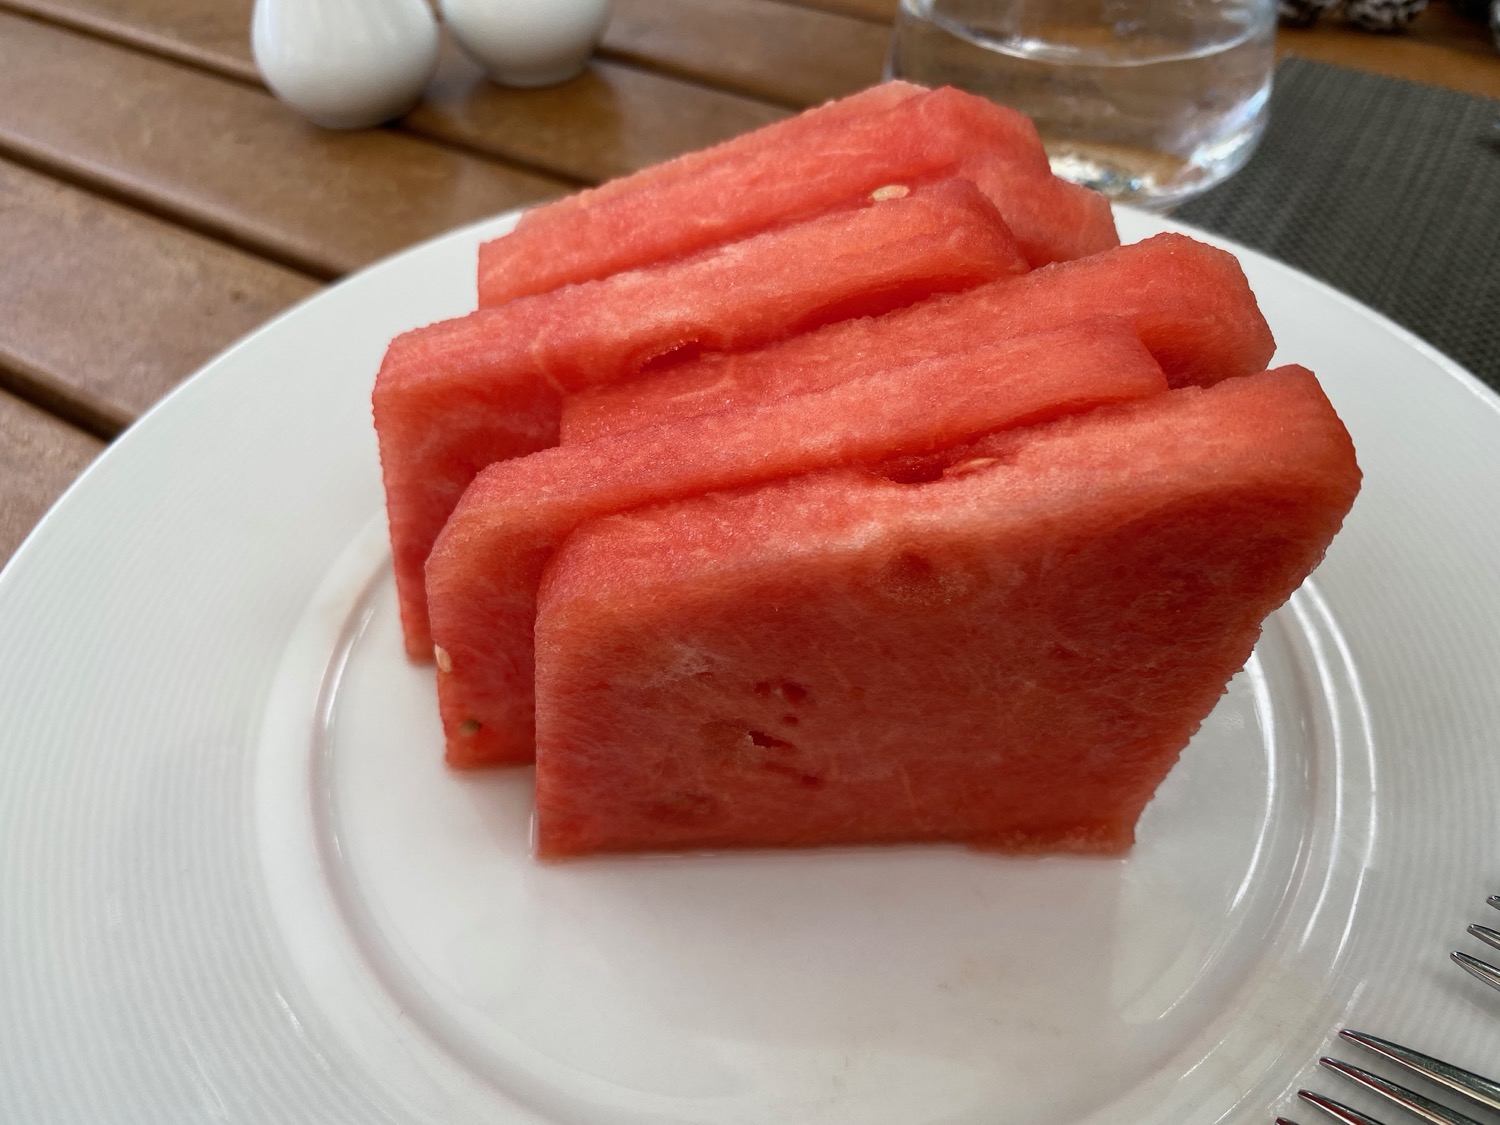 a plate of watermelon slices